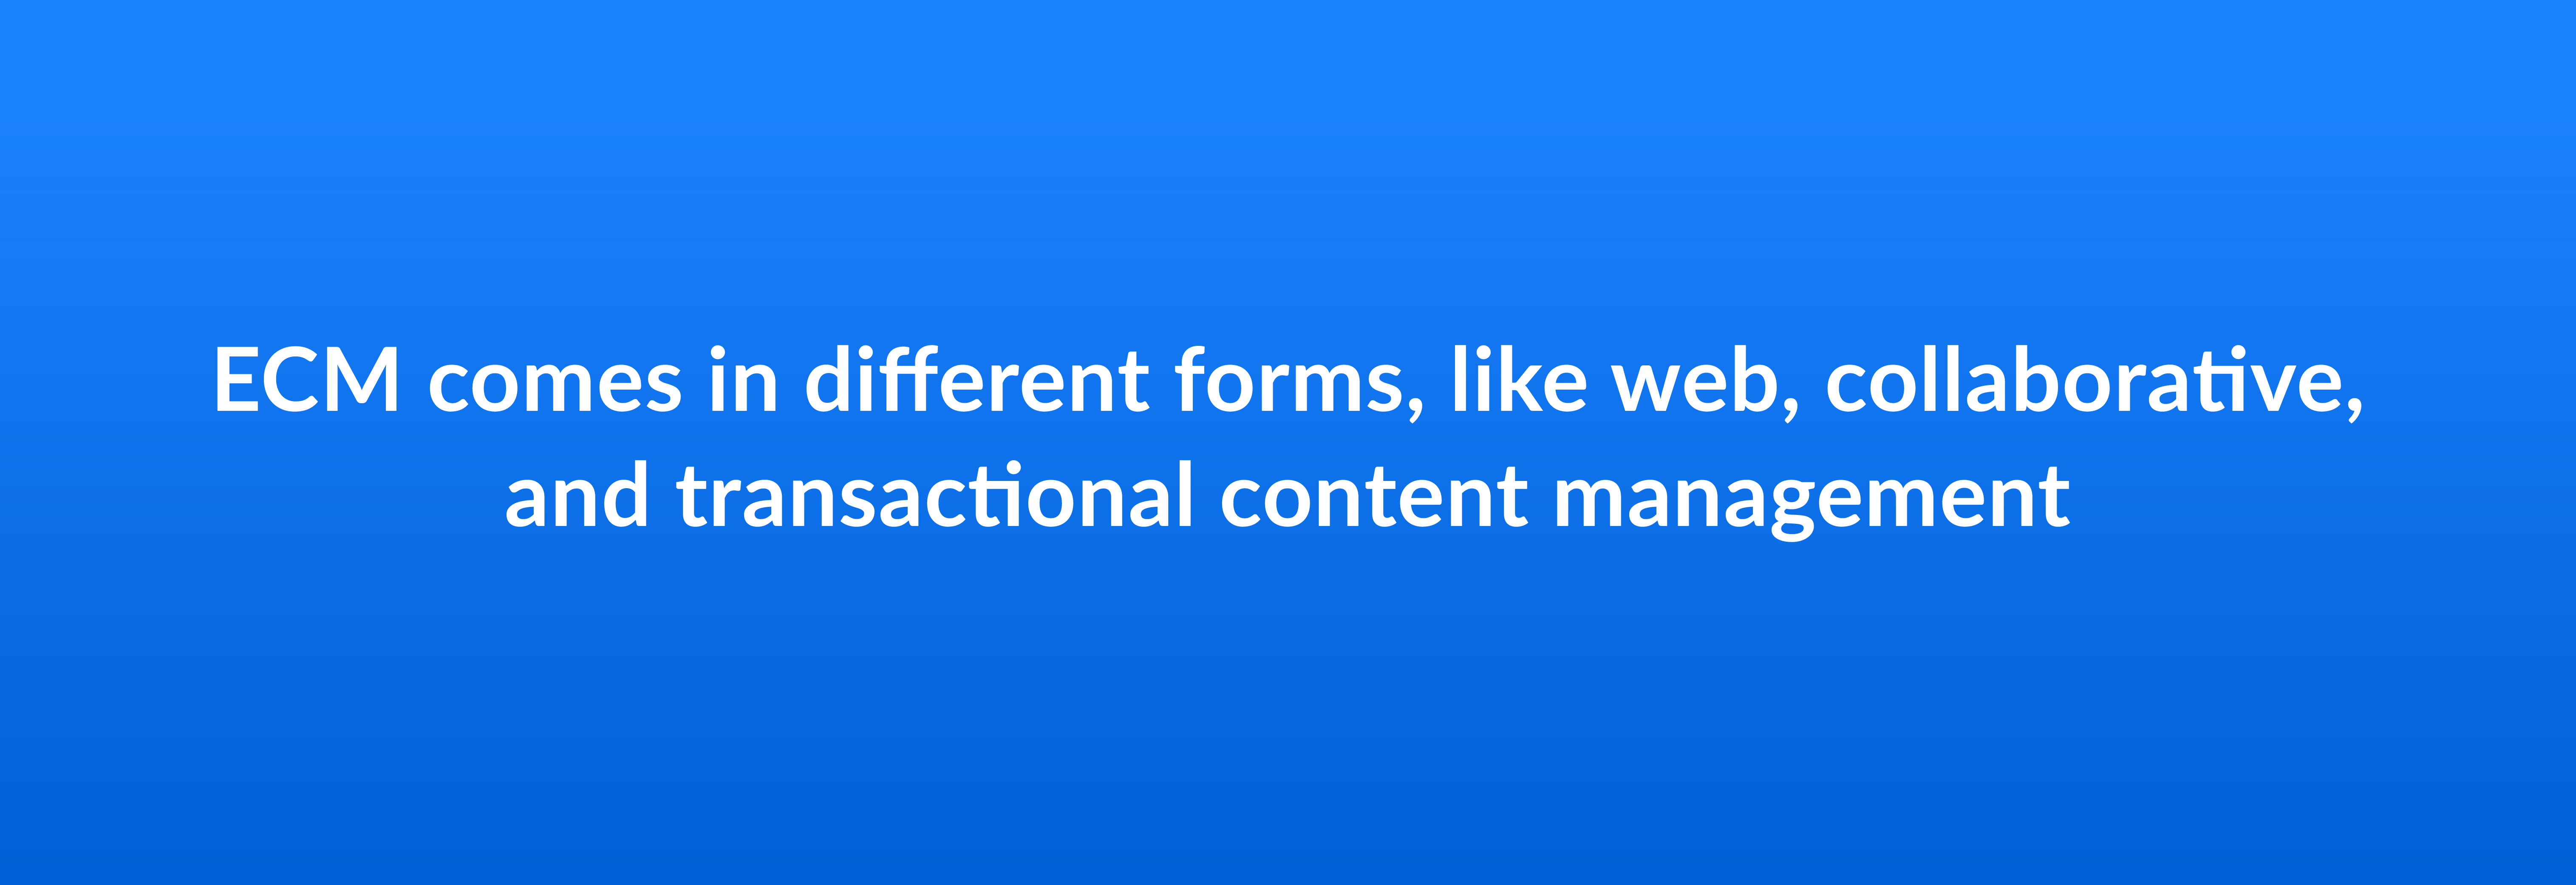 ECM comes in different forms, like web, collaborative, and transactional content management